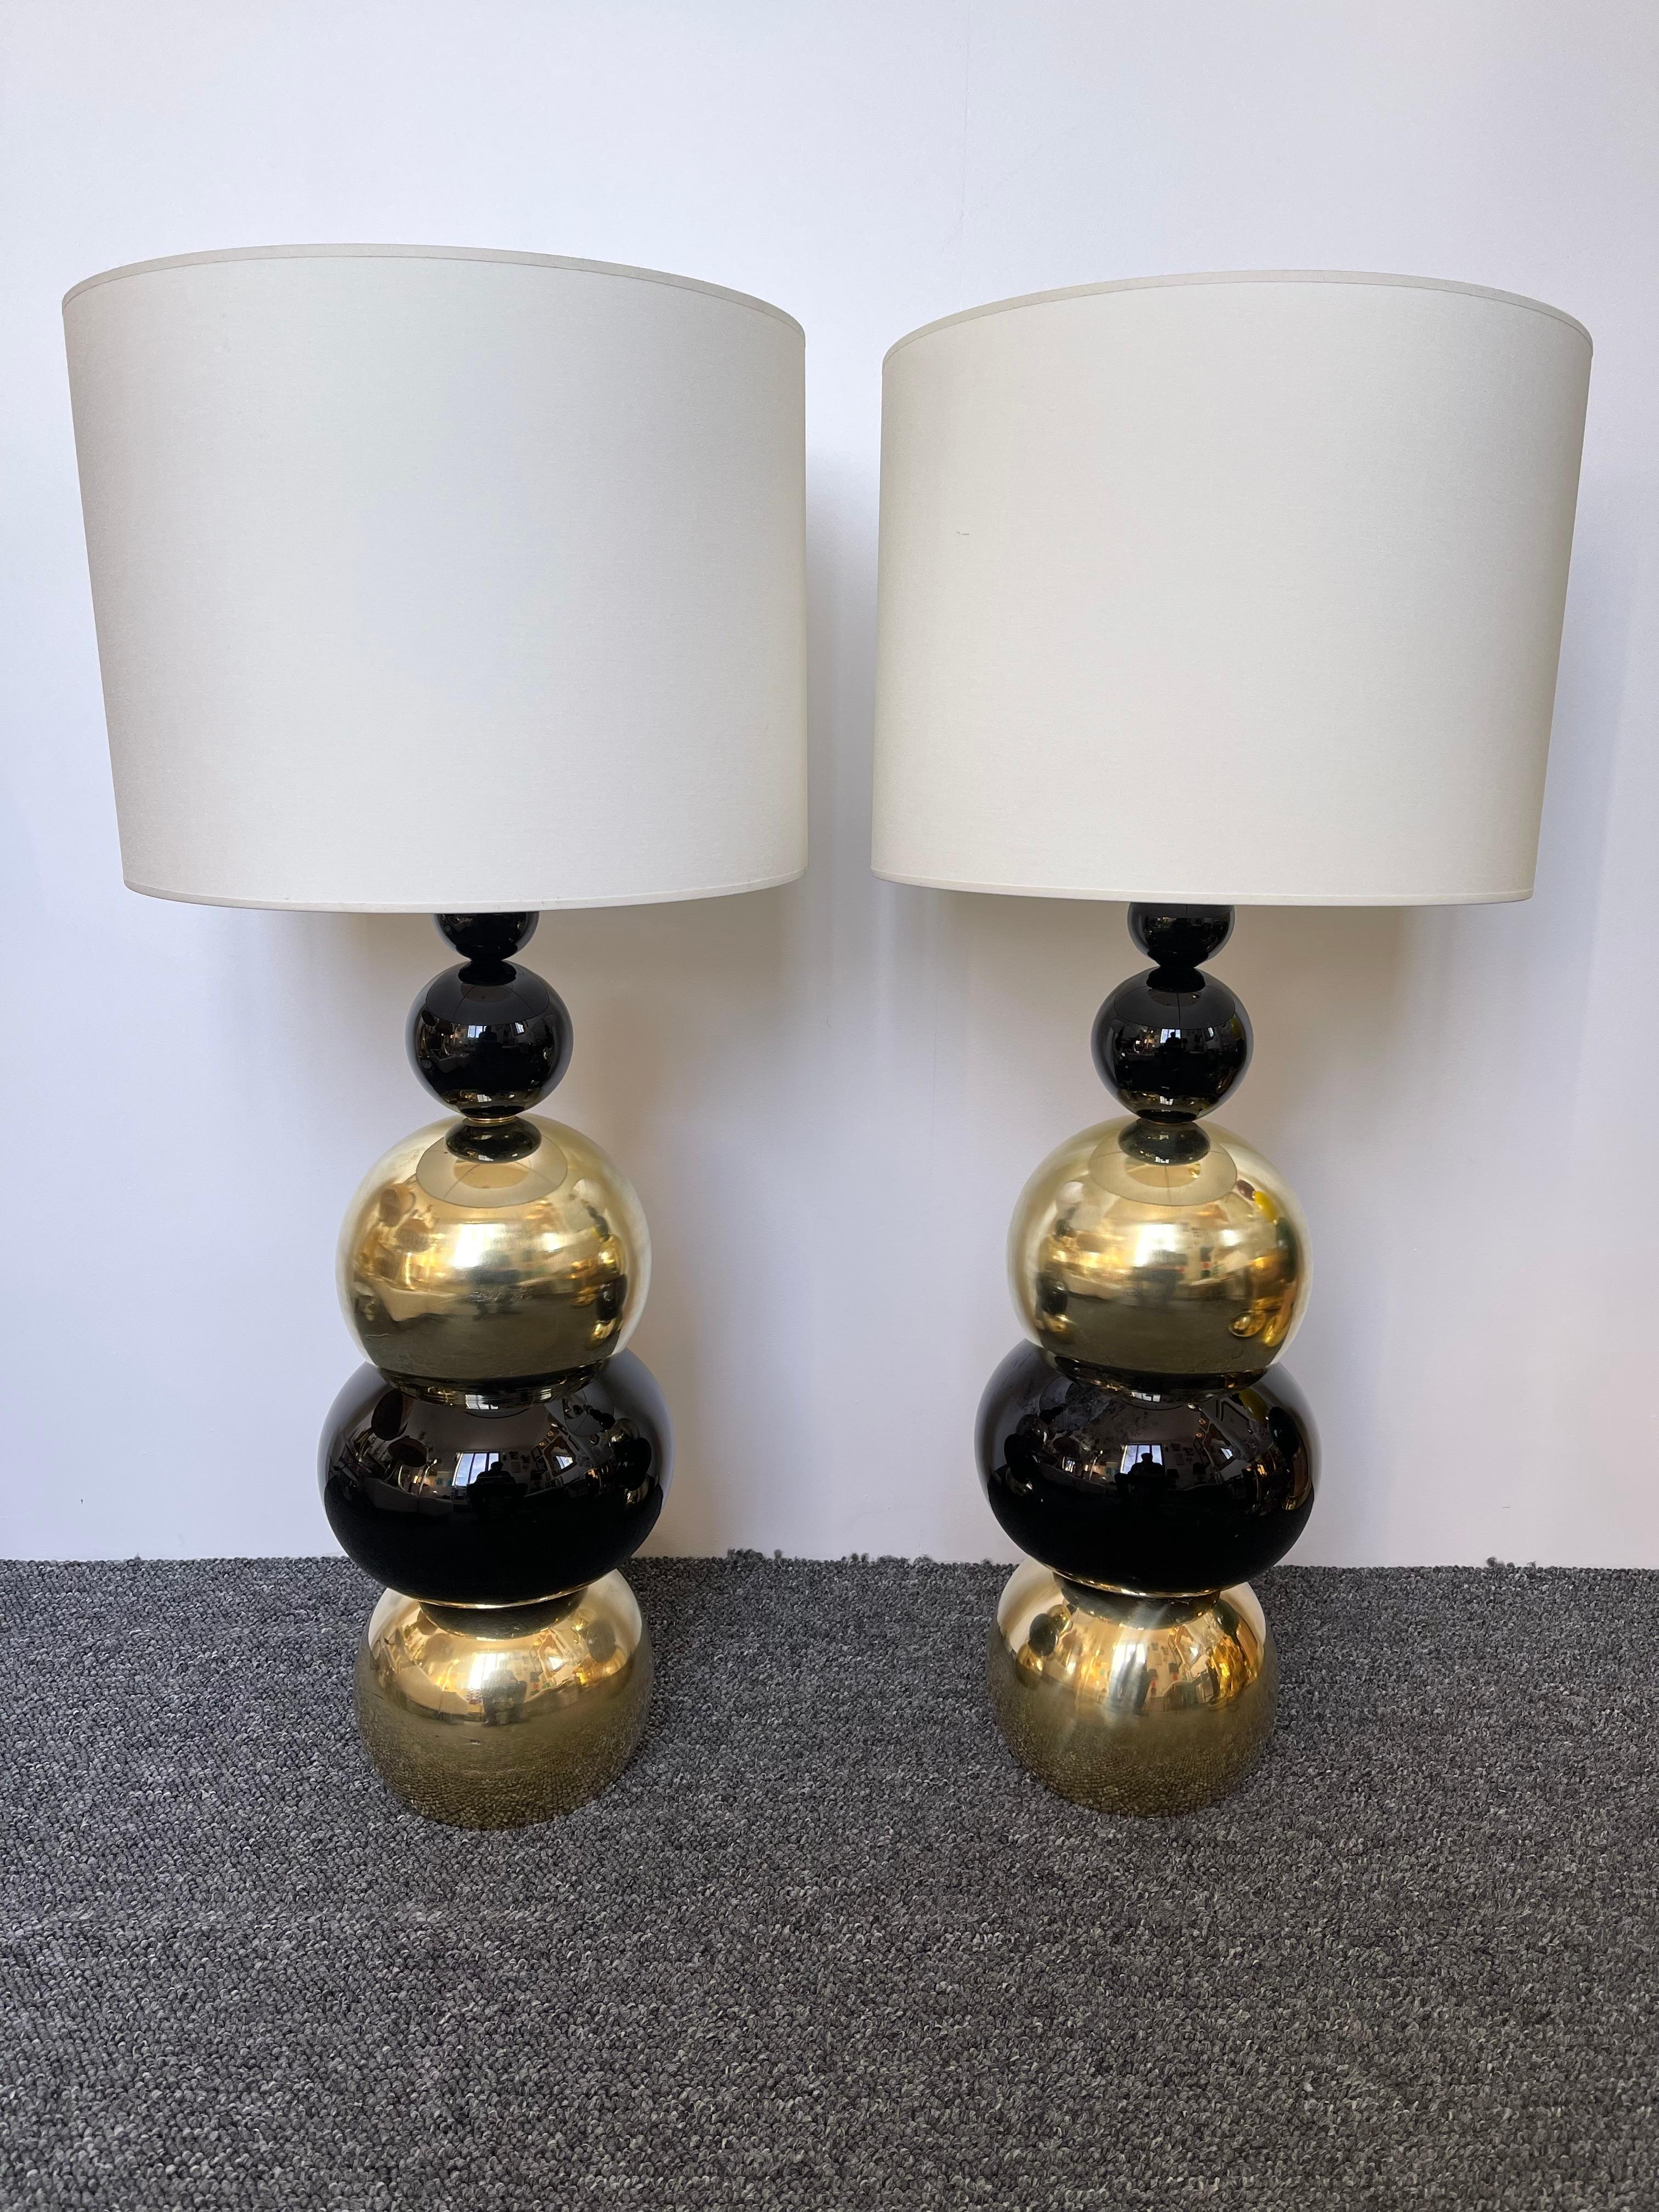 Pair of table or bedside brass lamps and black Murano glass. Contemporary work from a small italian artisanal workshop. In the mood of Venini, Mazzega, La Murrina, Veronese, Seguso, Barovier Toso.

Demo shades non included. Measurements in